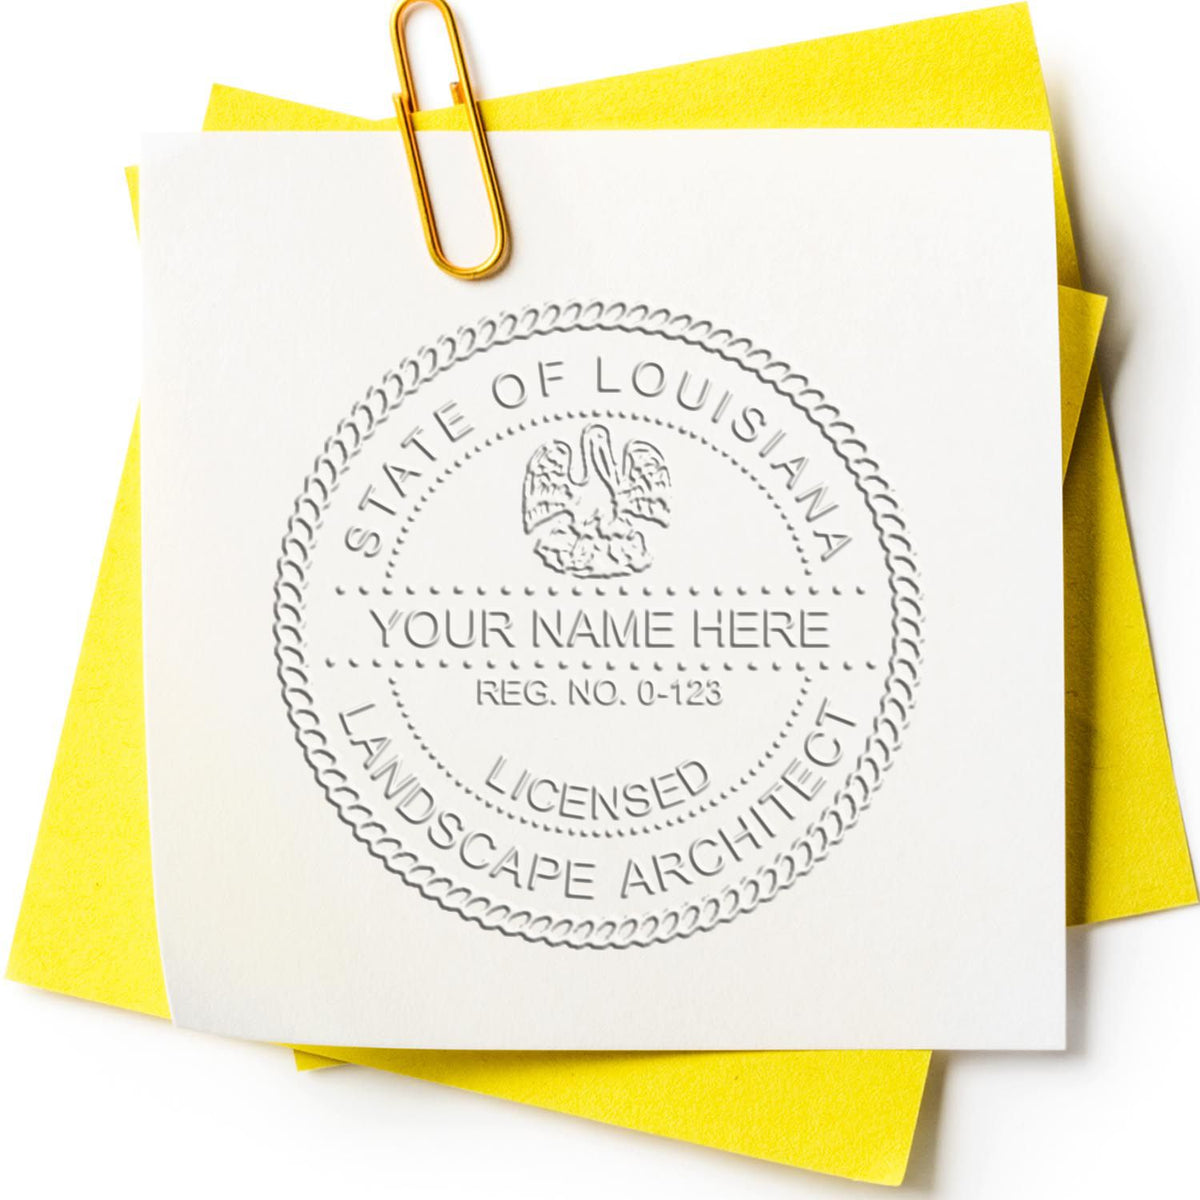 An in use photo of the Hybrid Louisiana Landscape Architect Seal showing a sample imprint on a cardstock